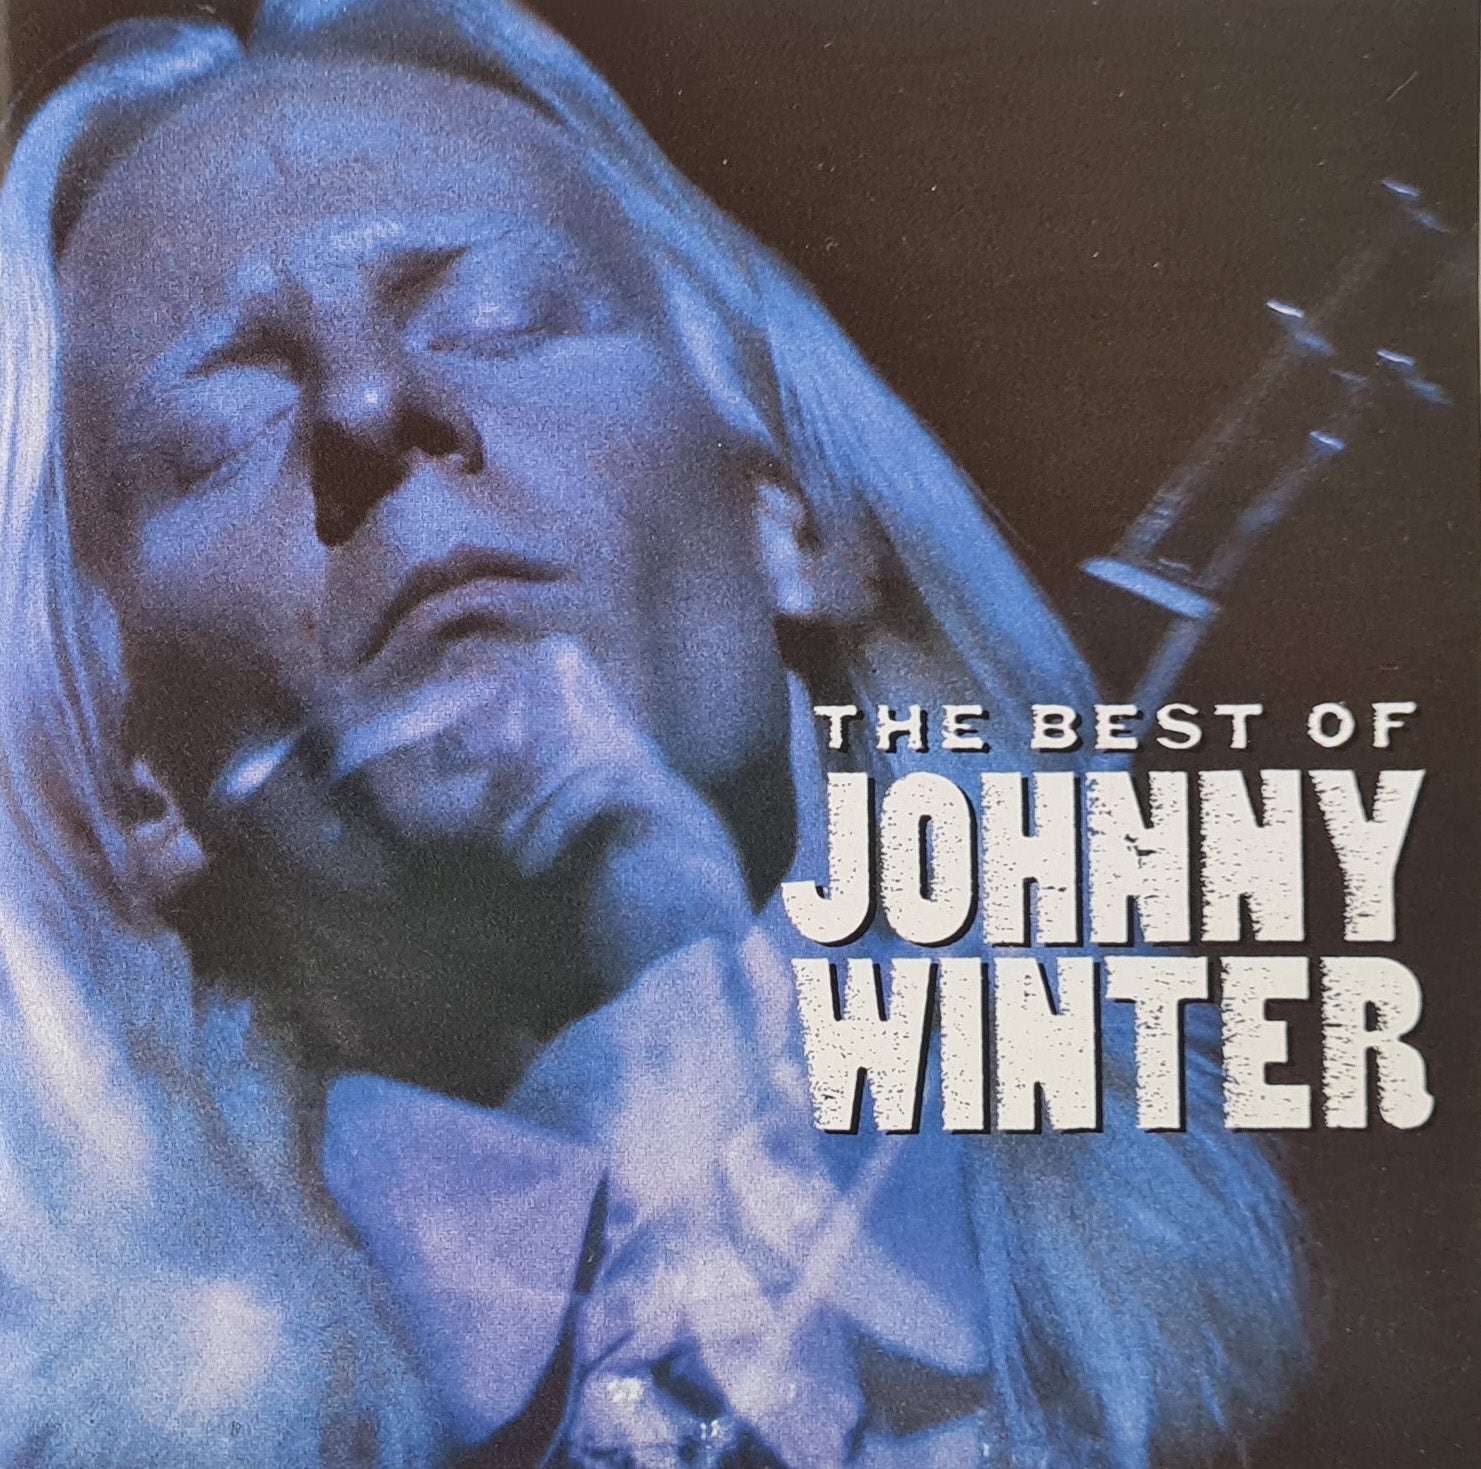 Johnny Winter - The Best of Johnny Winter (CD)